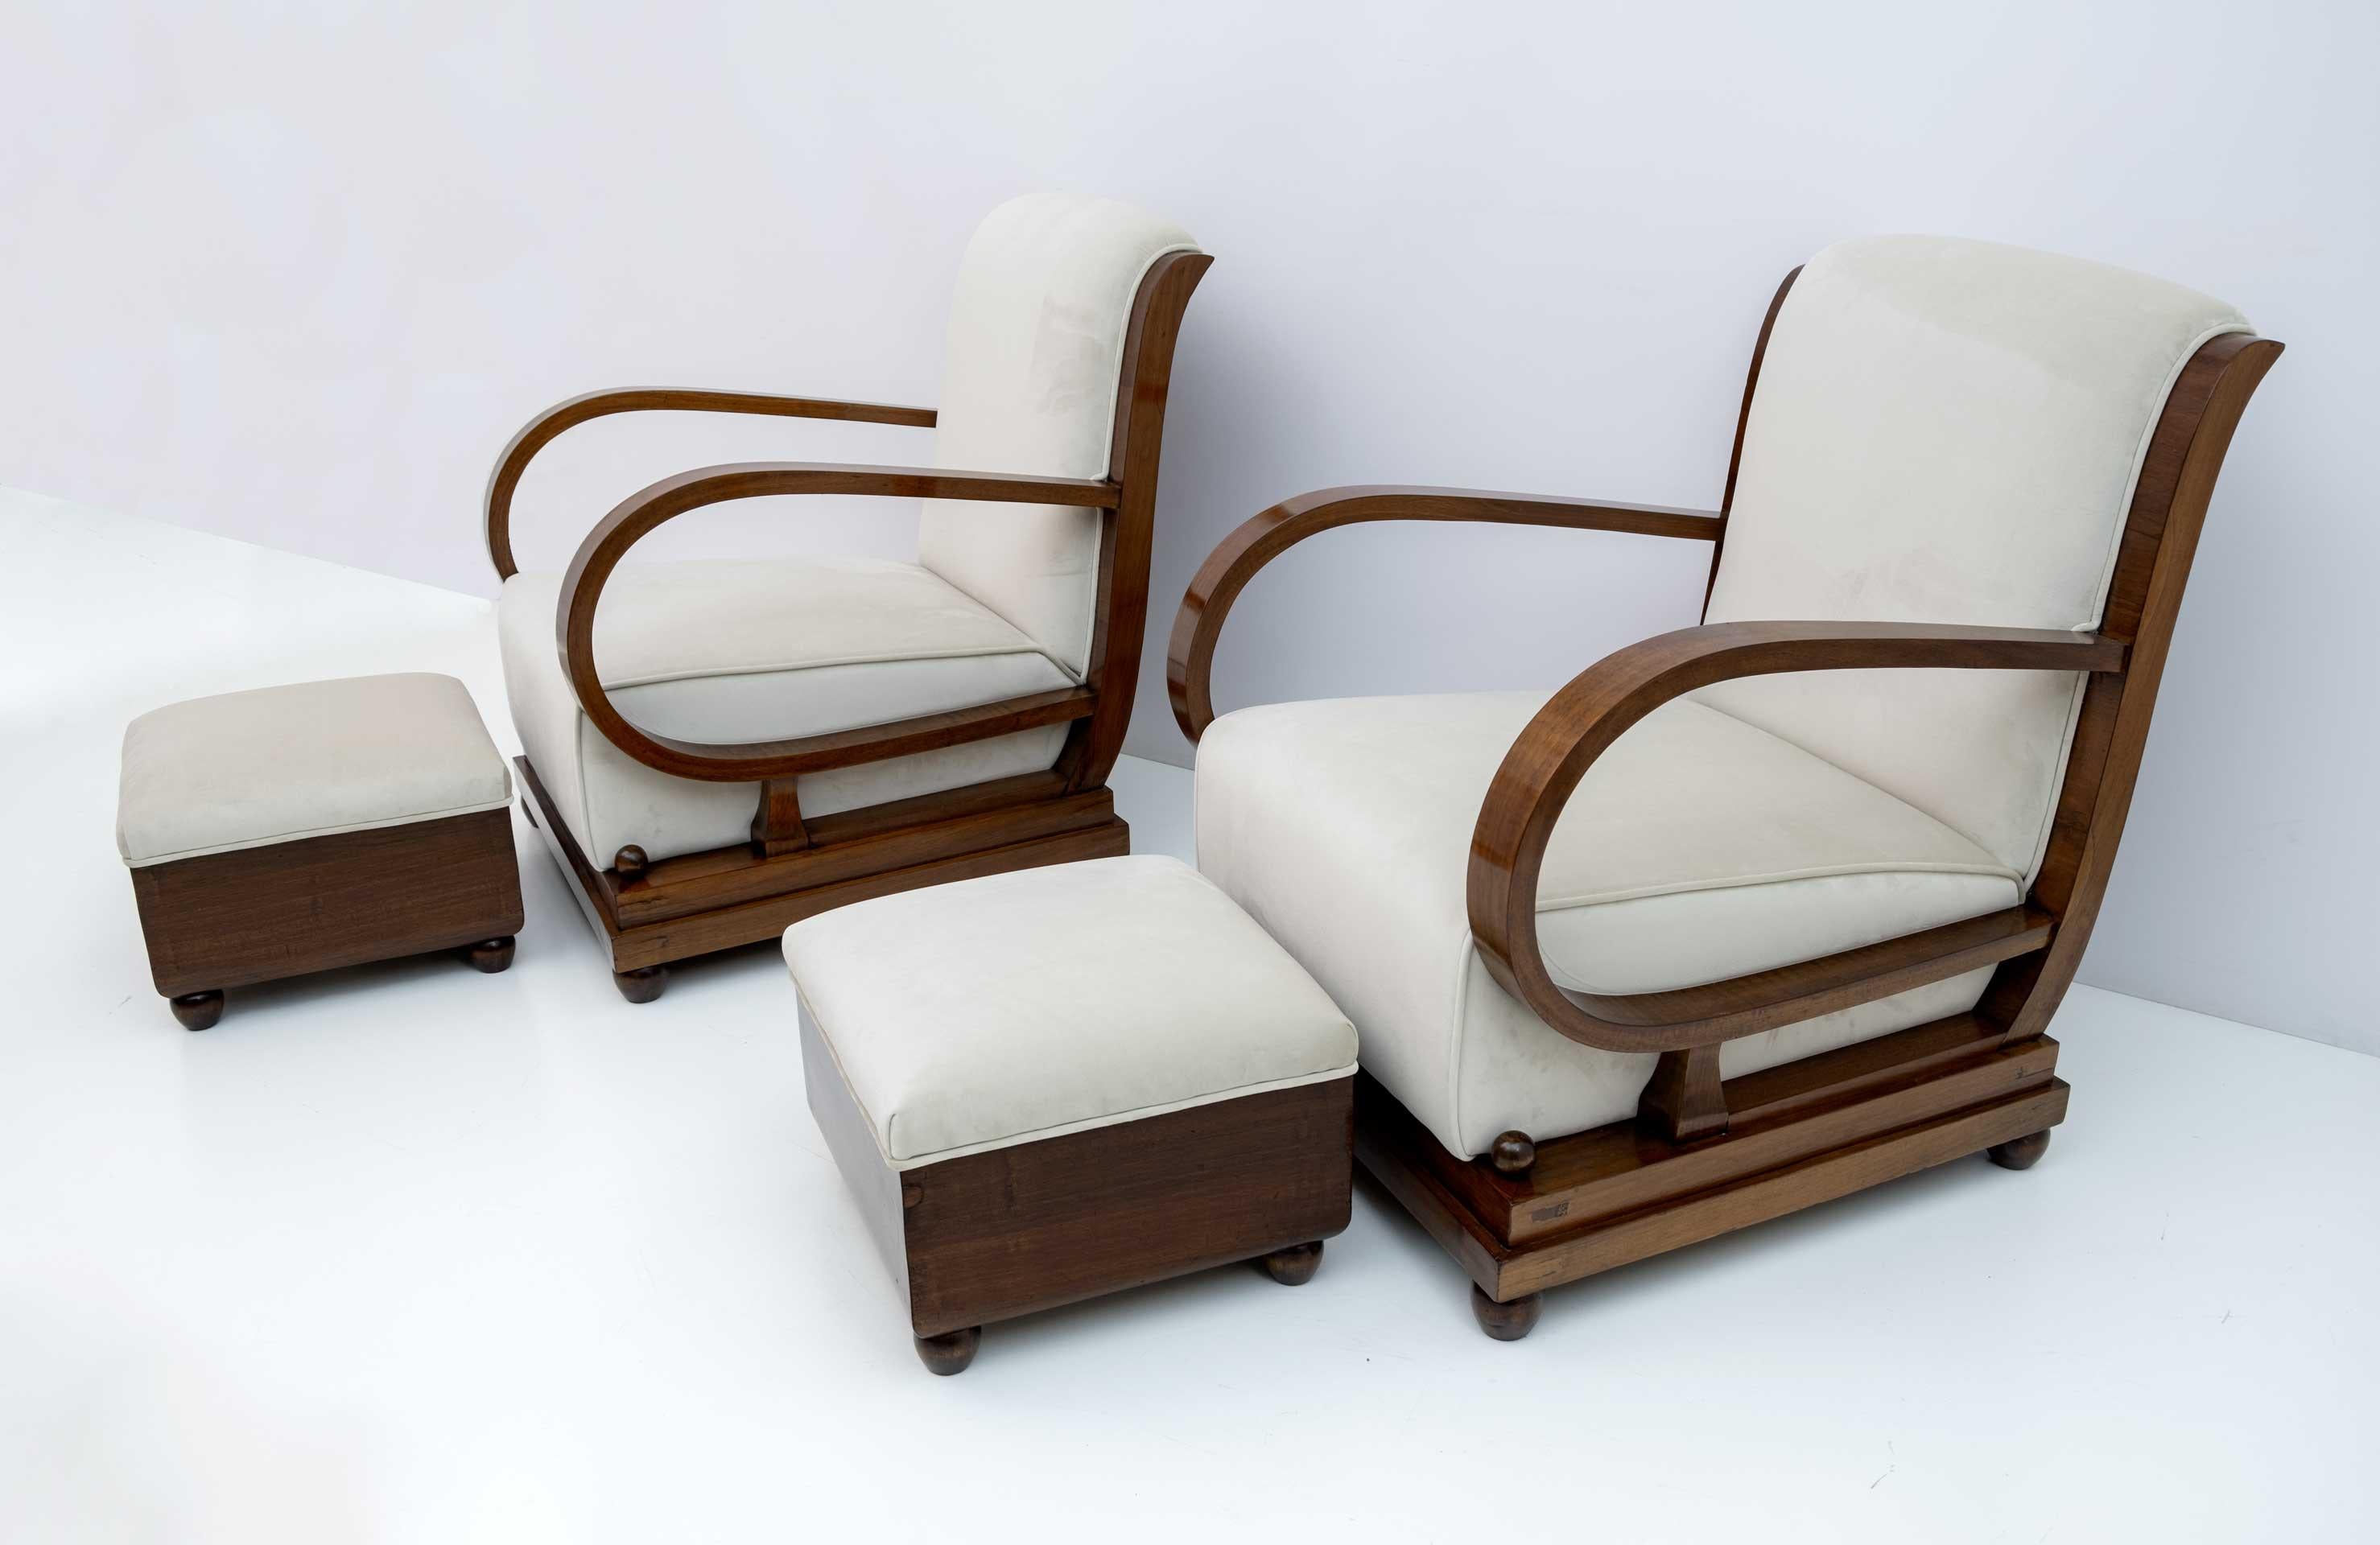 Italian set from the 1920s composed of a pair of armchairs and two poufs. From the early Art Deco period of Northern Italy, upholstered in walnut and ivory velvet, the backs of the sofa and armchairs are gracefully curved and extend out to